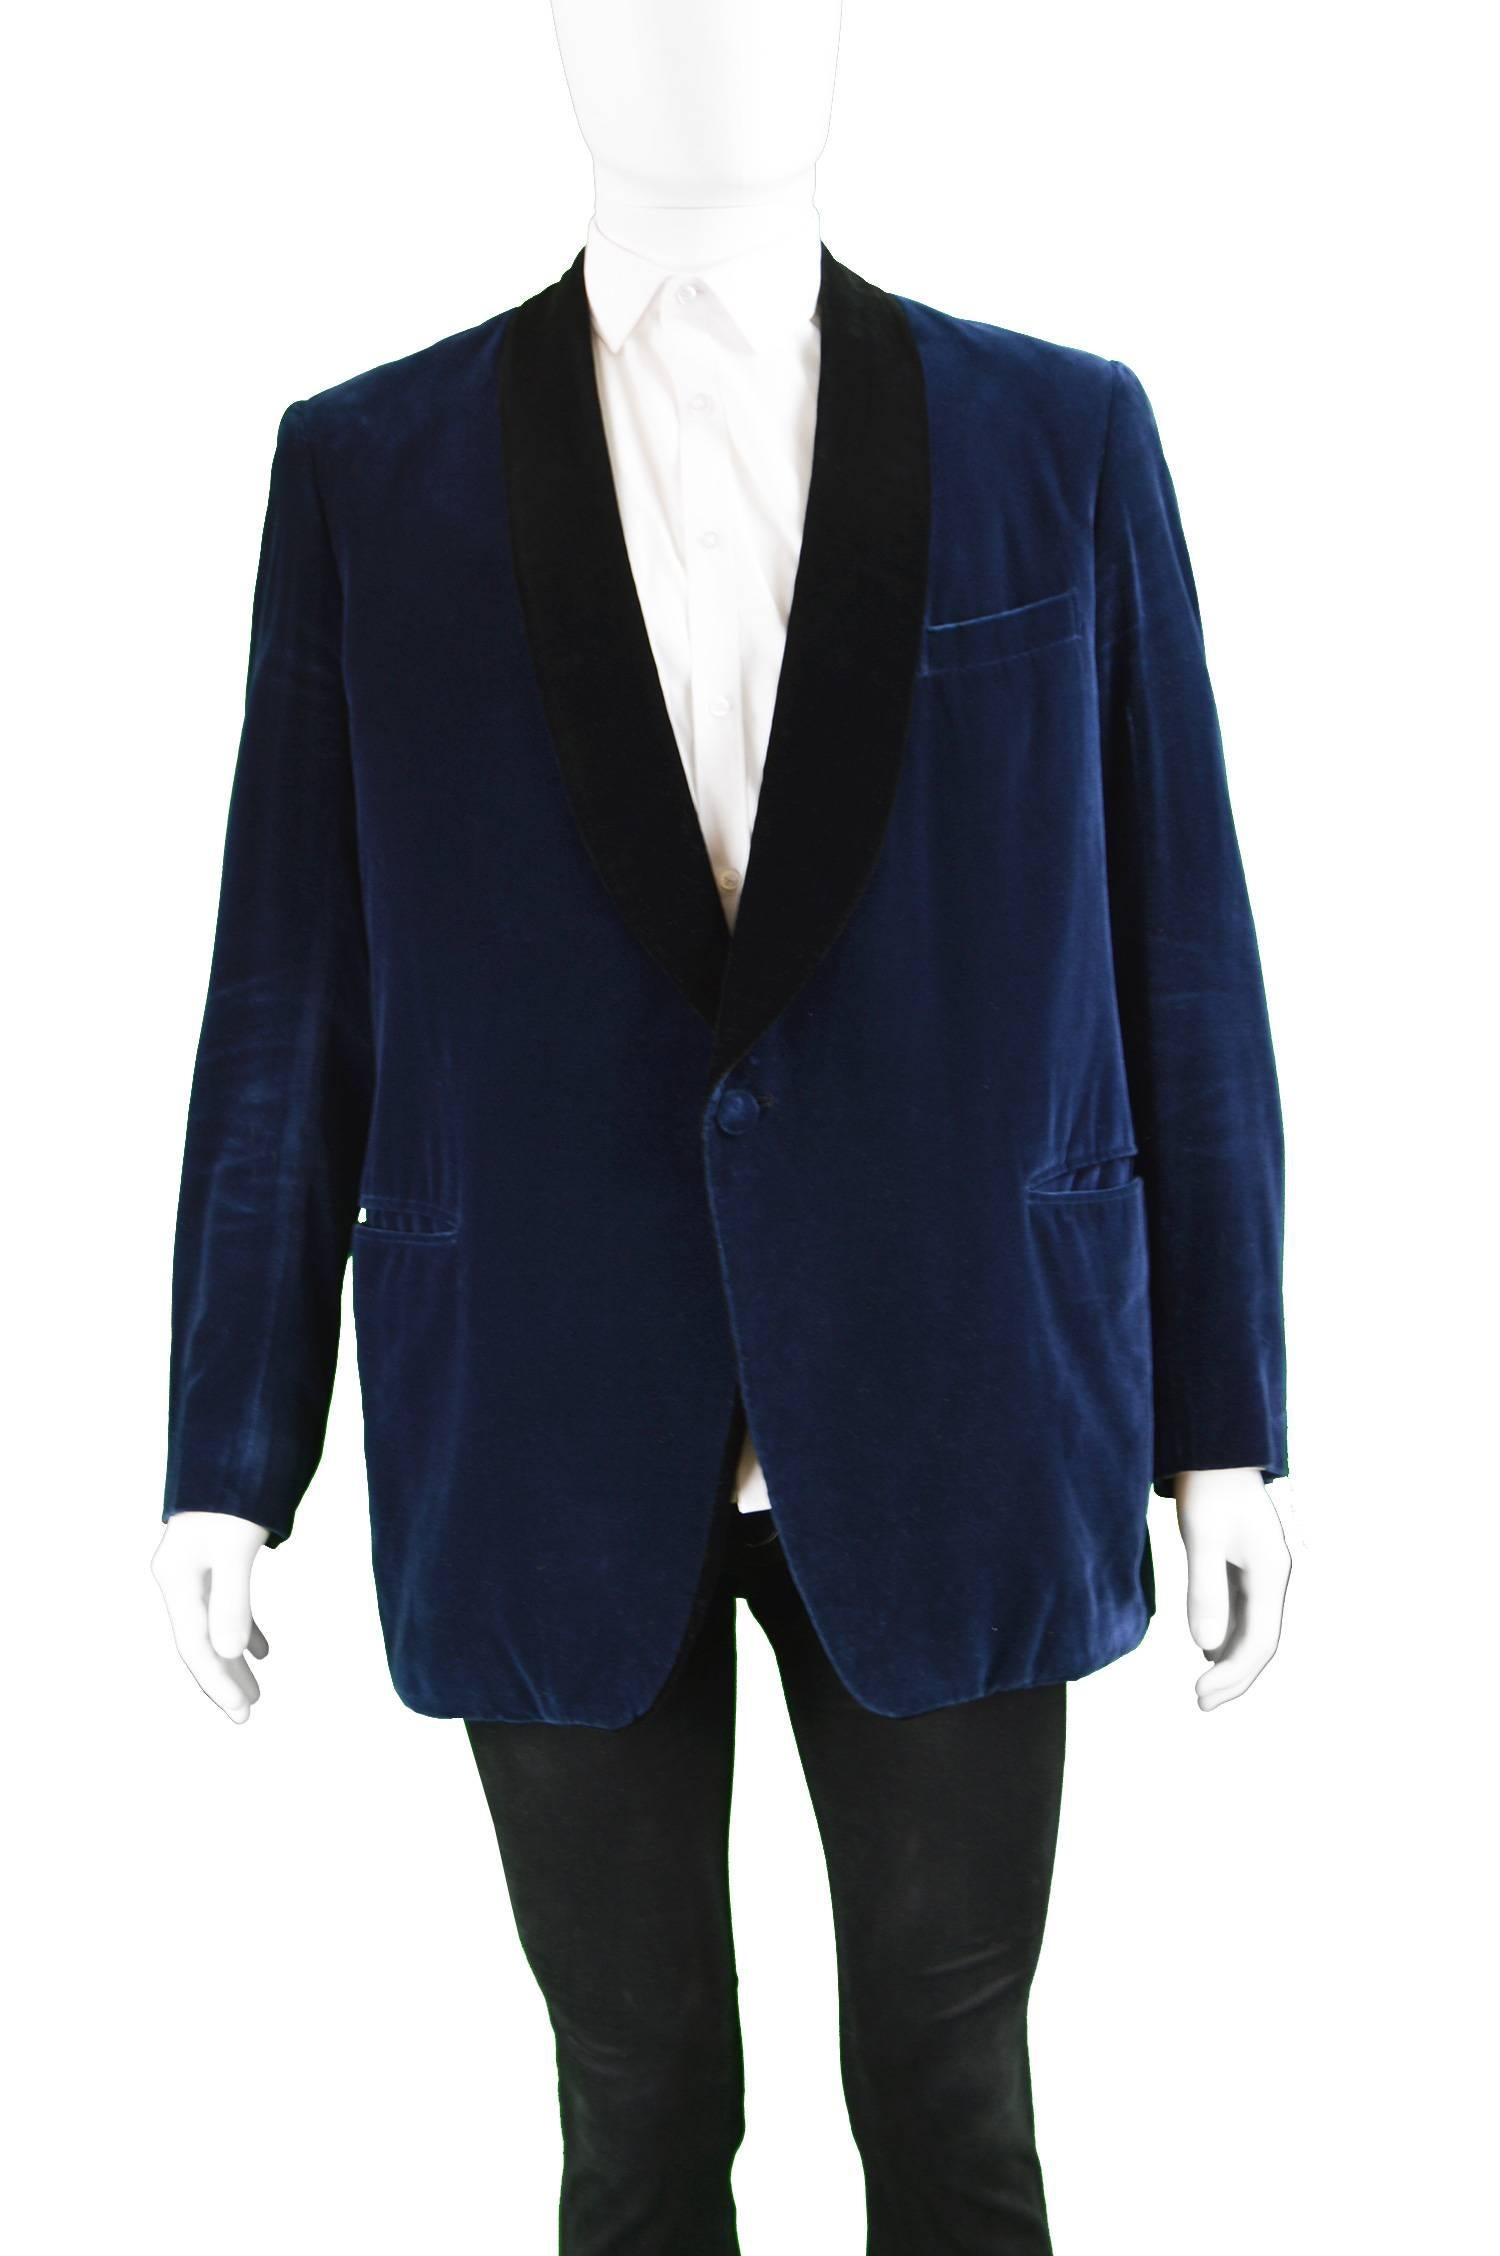 Harrods Men's Midnight Blue & Black Velvet Smoking Jacket, 1960s

Estimated Size: Men's XL. Please check measurements.
Chest - 46” / 117cm (Please remember to leave a couple of inches room for movement)
Length (Shoulder to Hem) - 31” /